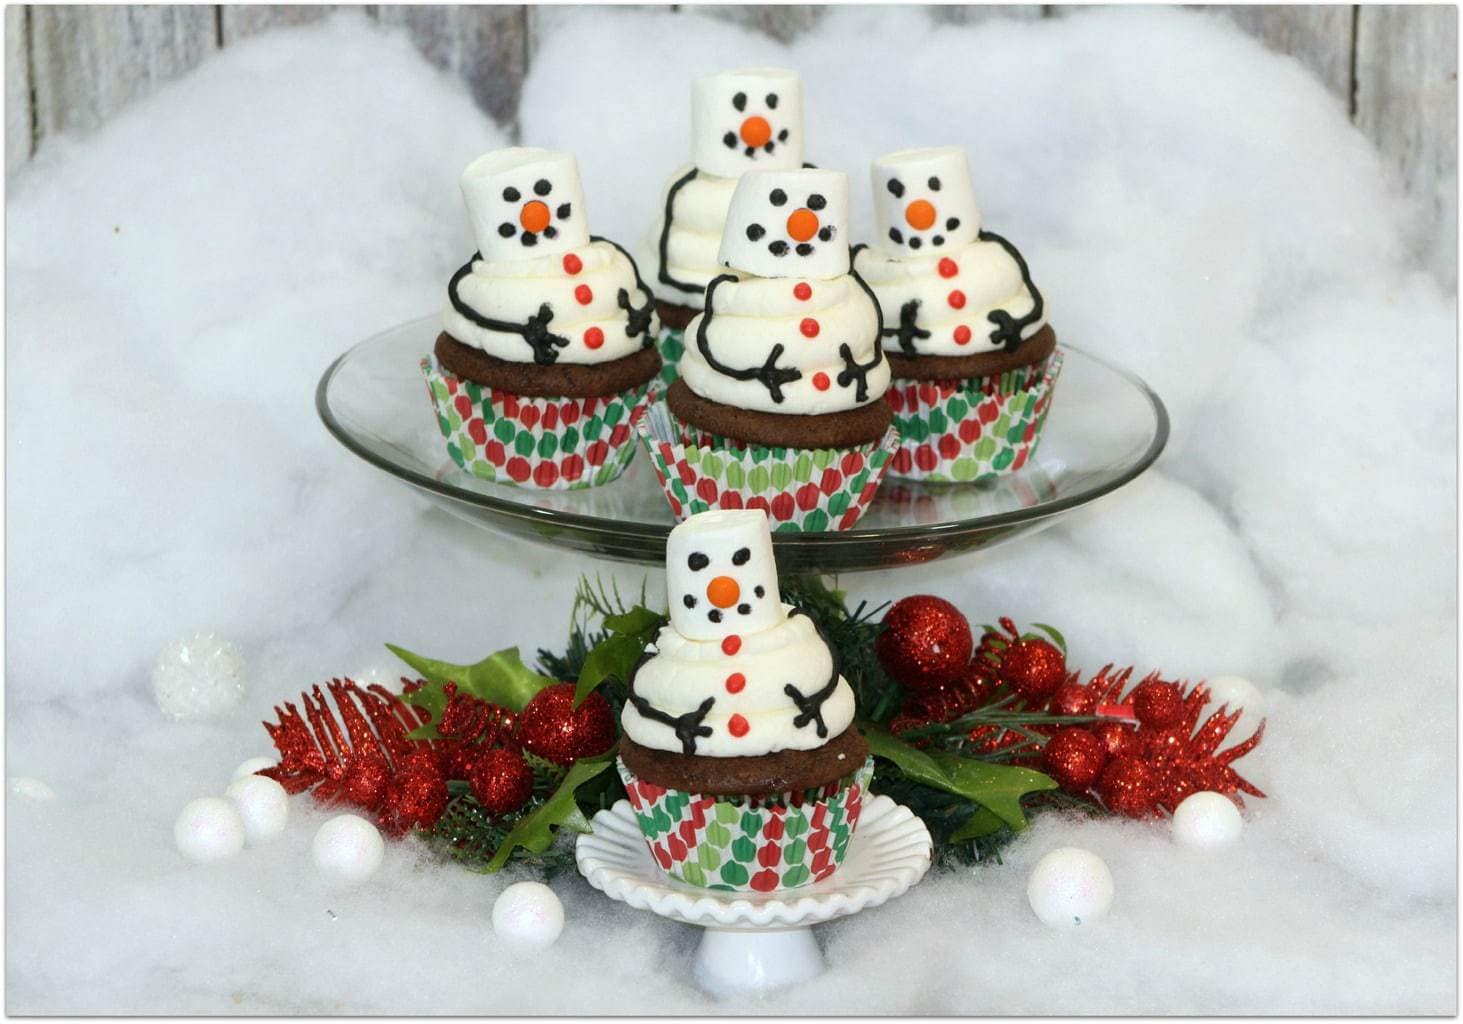  Everyone loves a snowman, and these snowman cupcakes are the perfect winter dessert for a holiday party! Need to whip up something quick? It's such an easy dessert recipe! You can’t go wrong combining chocolate, marshmallows, and cake, right? Head to the kitchen with the kids. Even the little ones can build these snowman cupcakes! 